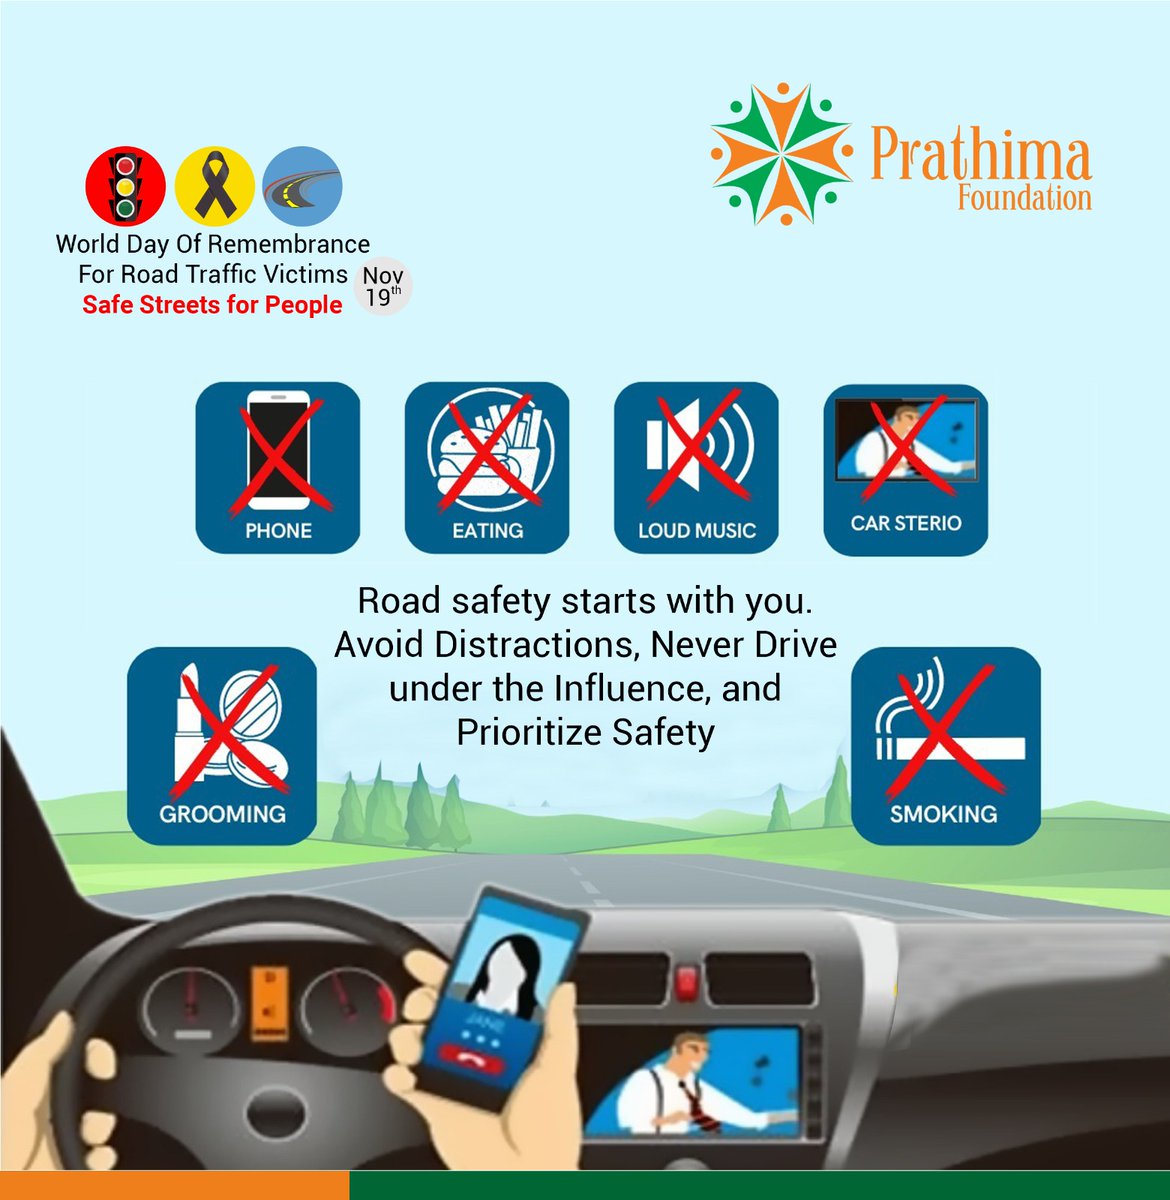 Road safety starts with you. Avoid Distractions, Never Drive under the Influence, and Prioritize Safety

#RoadSafetyRemembrance #RememberingRoadVictims #RoadSafetyAwareness #RoadSafetyMatters #InMemoryOfRoadVictims #trending #trendingnow #prathimafpundation #prathima #PF